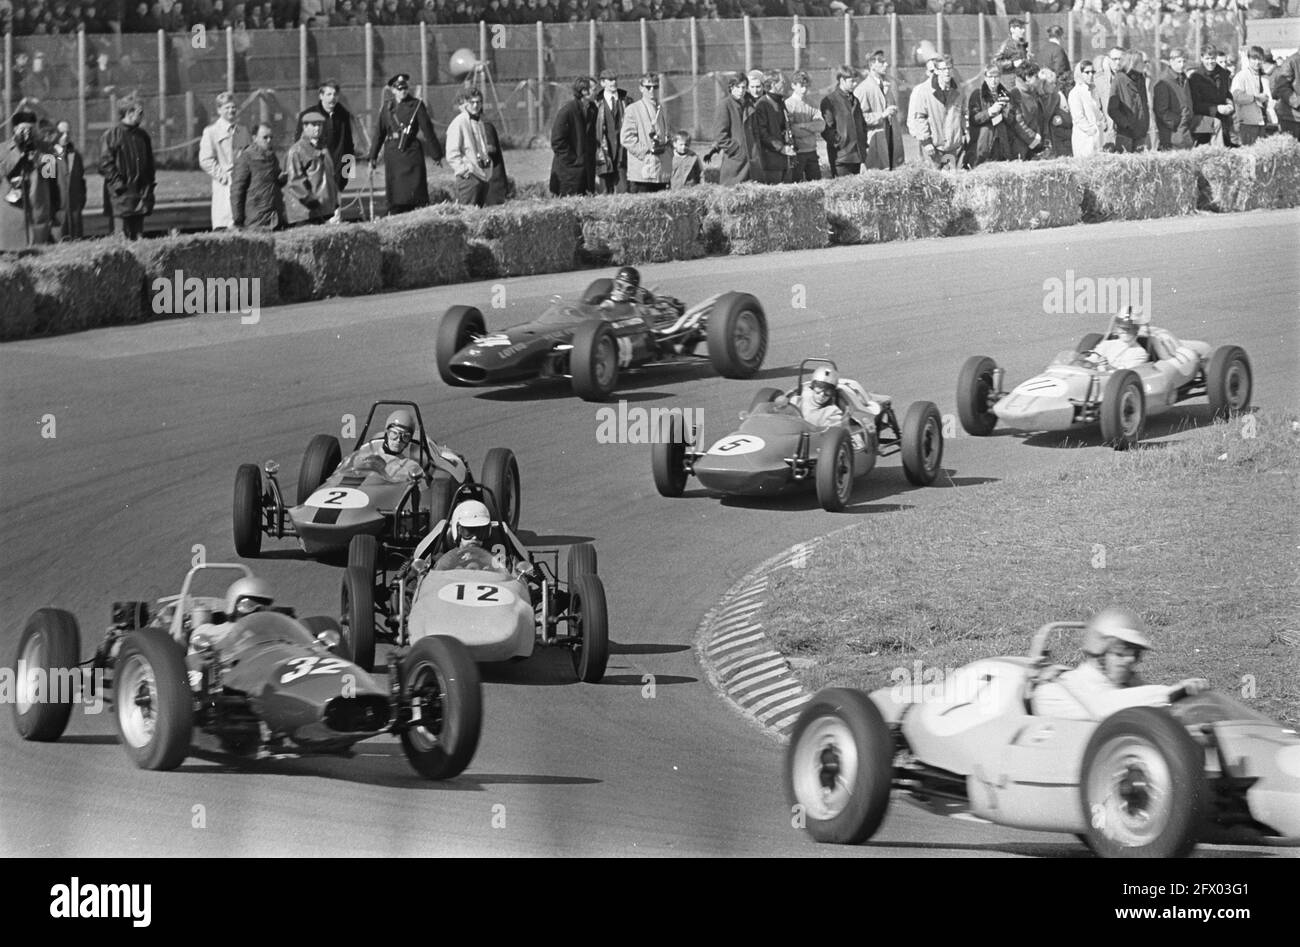 Autoraces at Zandvoort. Autoraces at Zandvoort. Overview formula libre Monoposto, April 7, 1968, autosport, sport, The Netherlands, 20th century press agency photo, news to remember, documentary, historic photography 1945-1990, visual stories, human history of the Twentieth Century, capturing moments in time Stock Photo